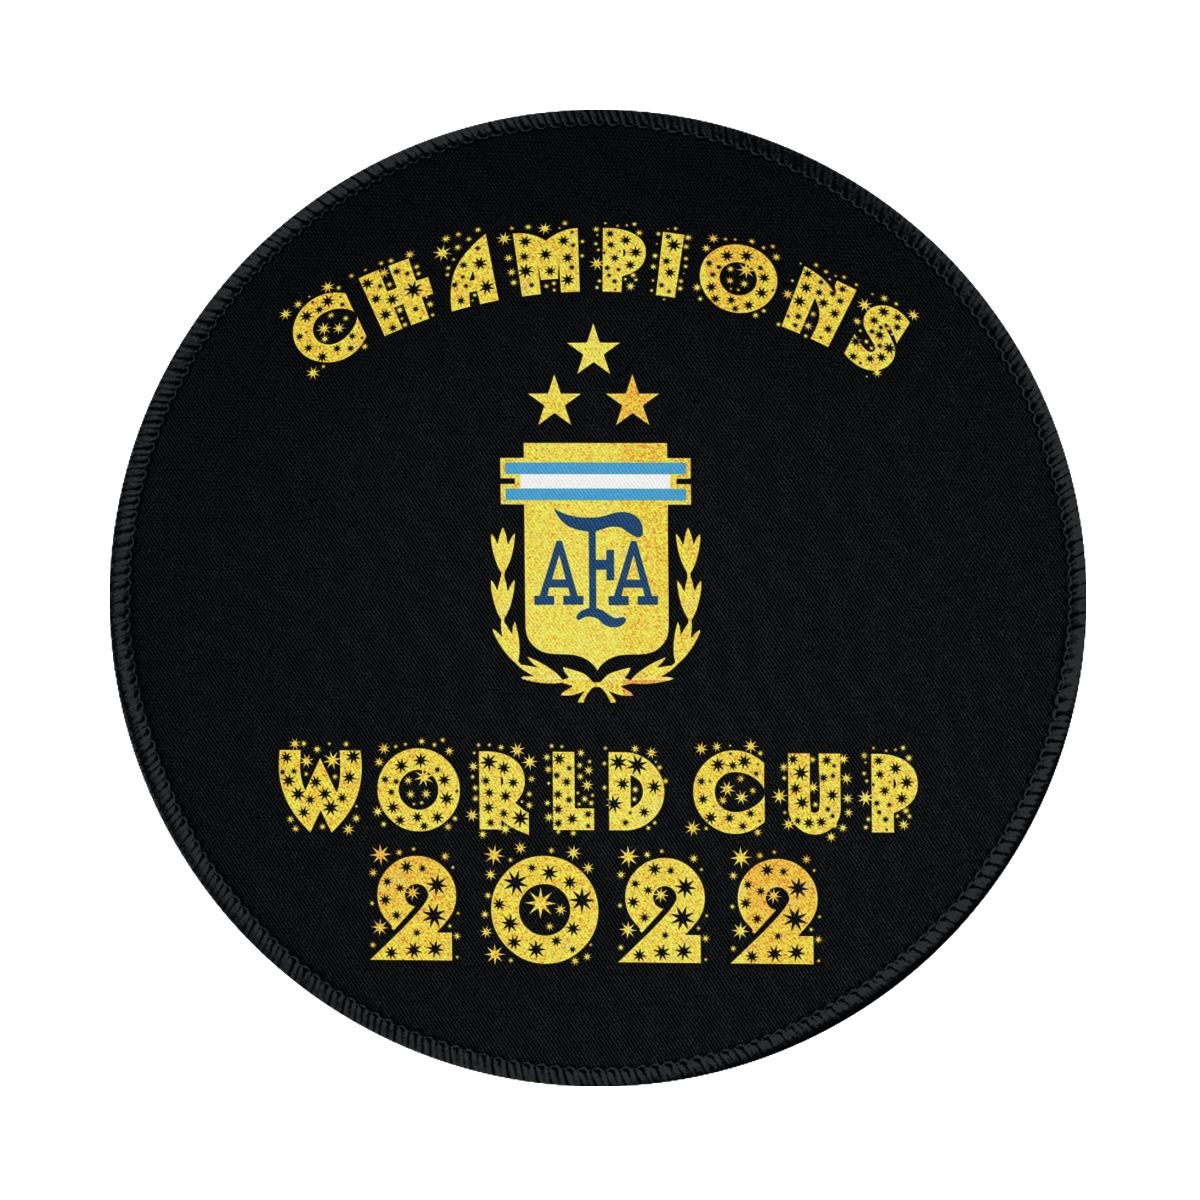 Argentina 2022 World Cup Champions Waterproof Round Mouse Pad for Wireless Mouse